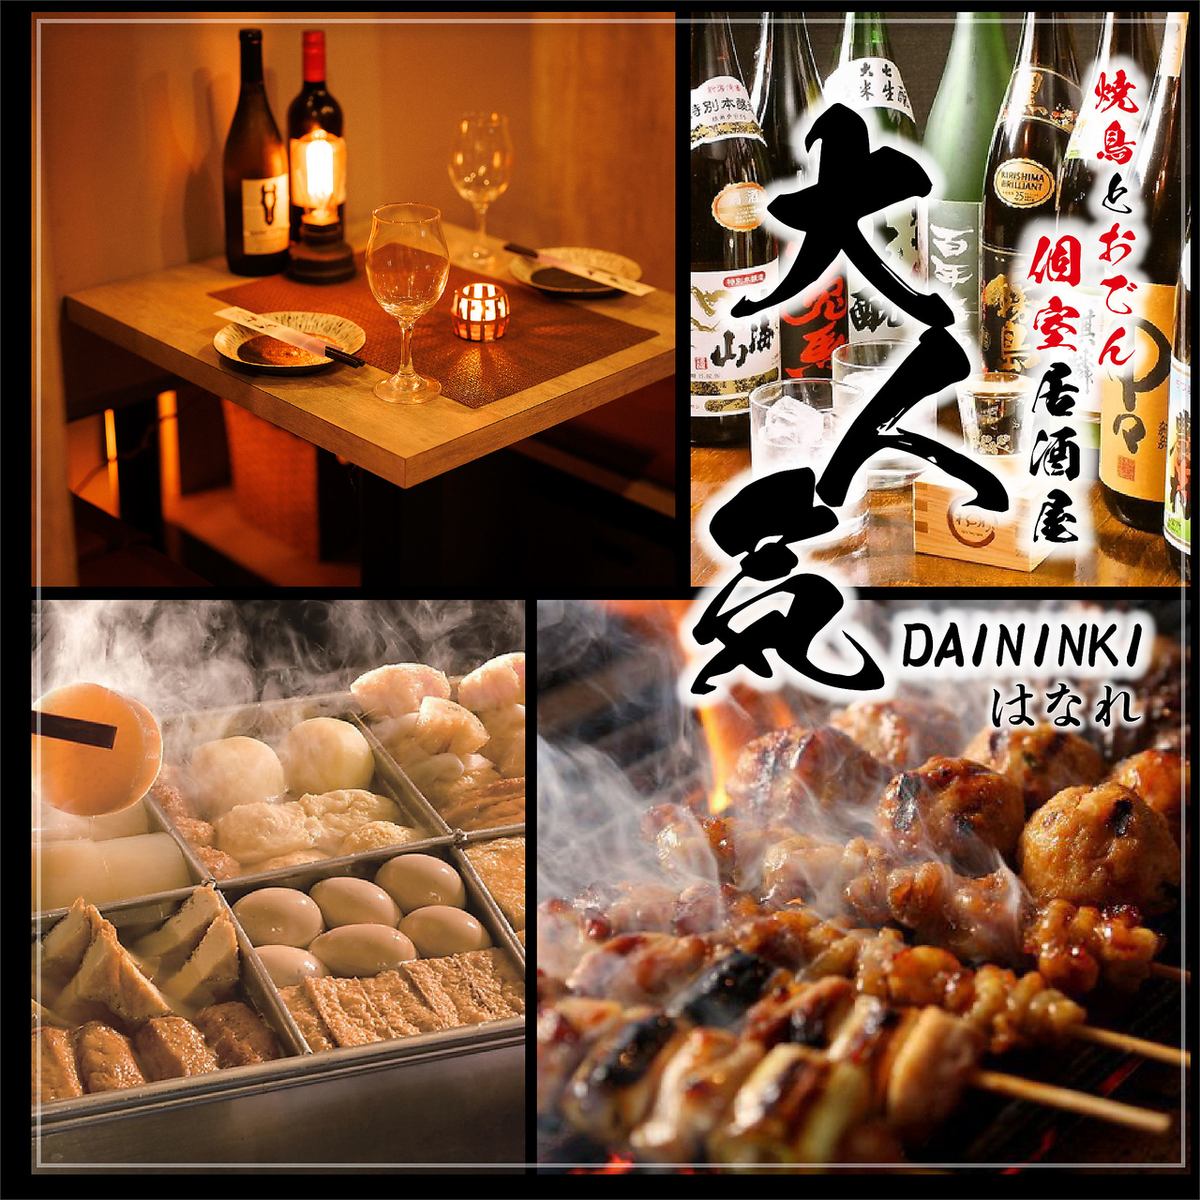 3 minutes walk from Shinjuku Station East Exit! All-you-can-eat and drink Neo Izakaya in Kabukicho